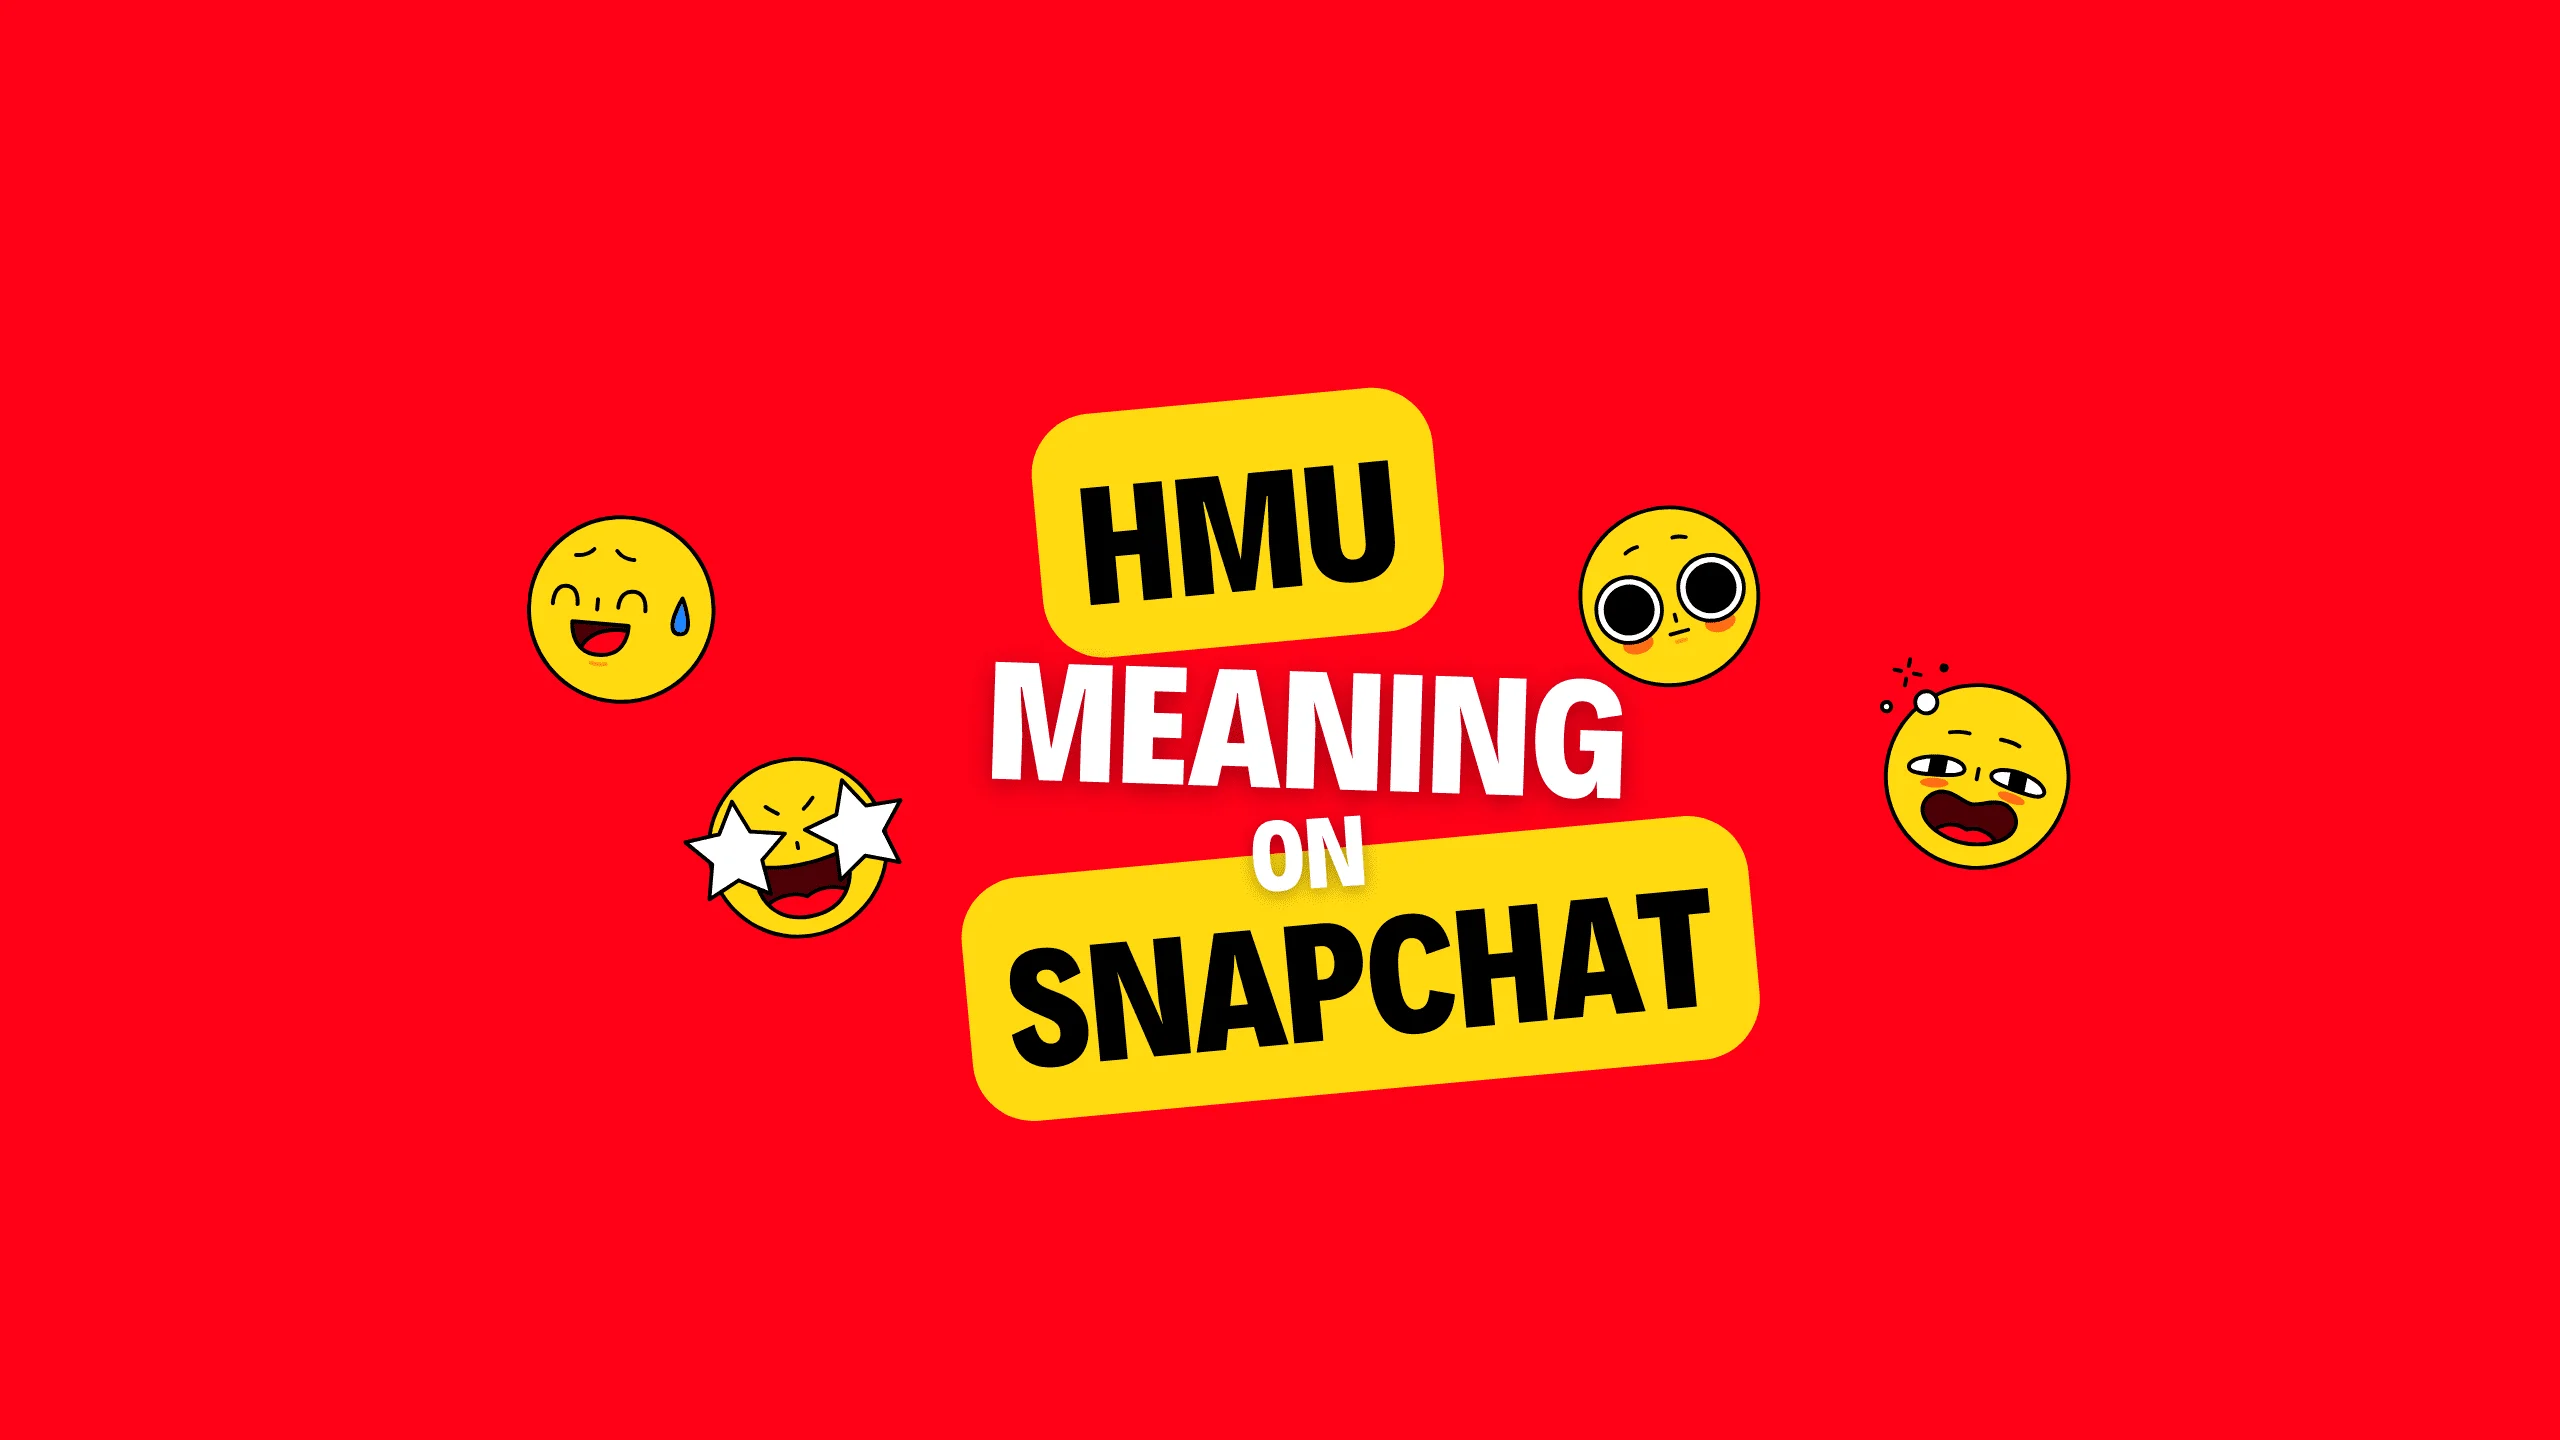 What does HMU mean on Snapchat